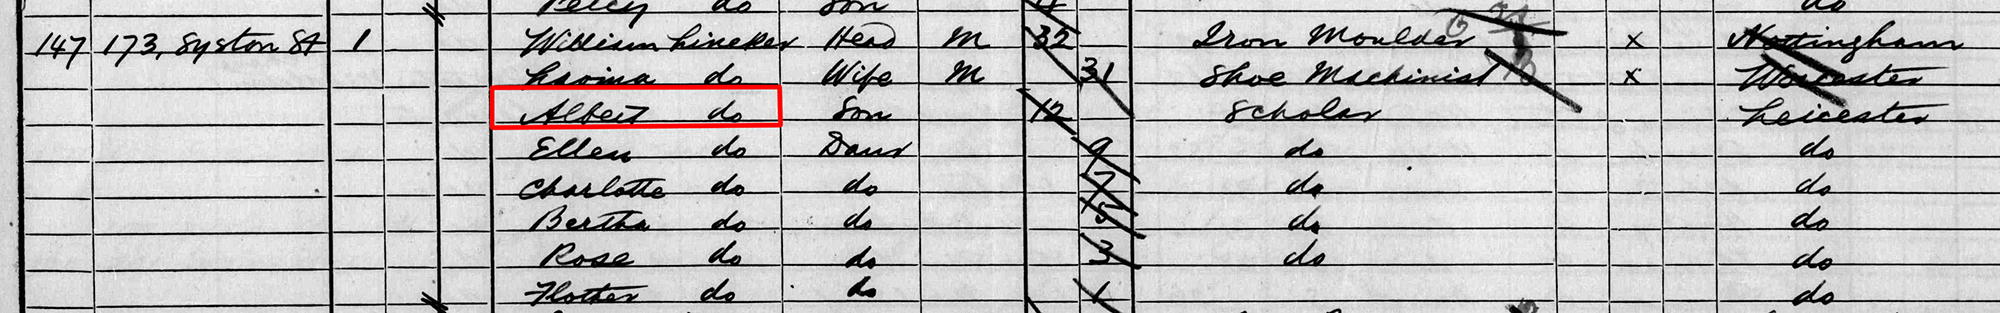 George and family in the 1891 Census